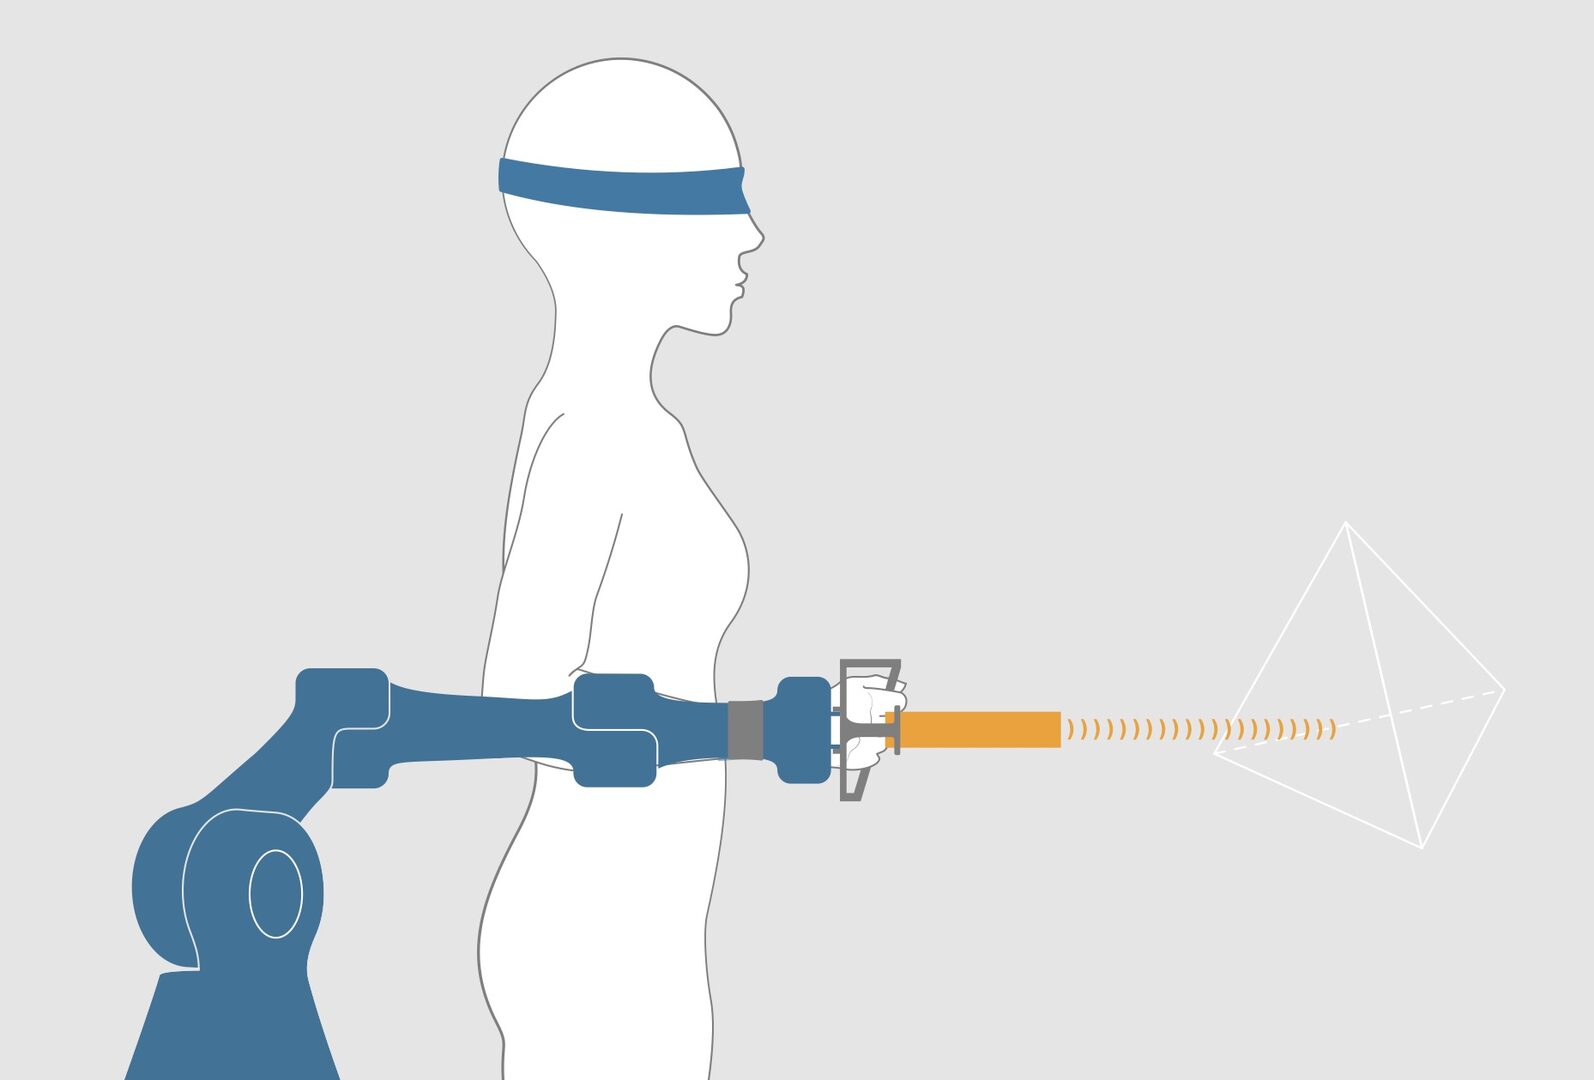 Human fixed to robot arm holding enactive torch